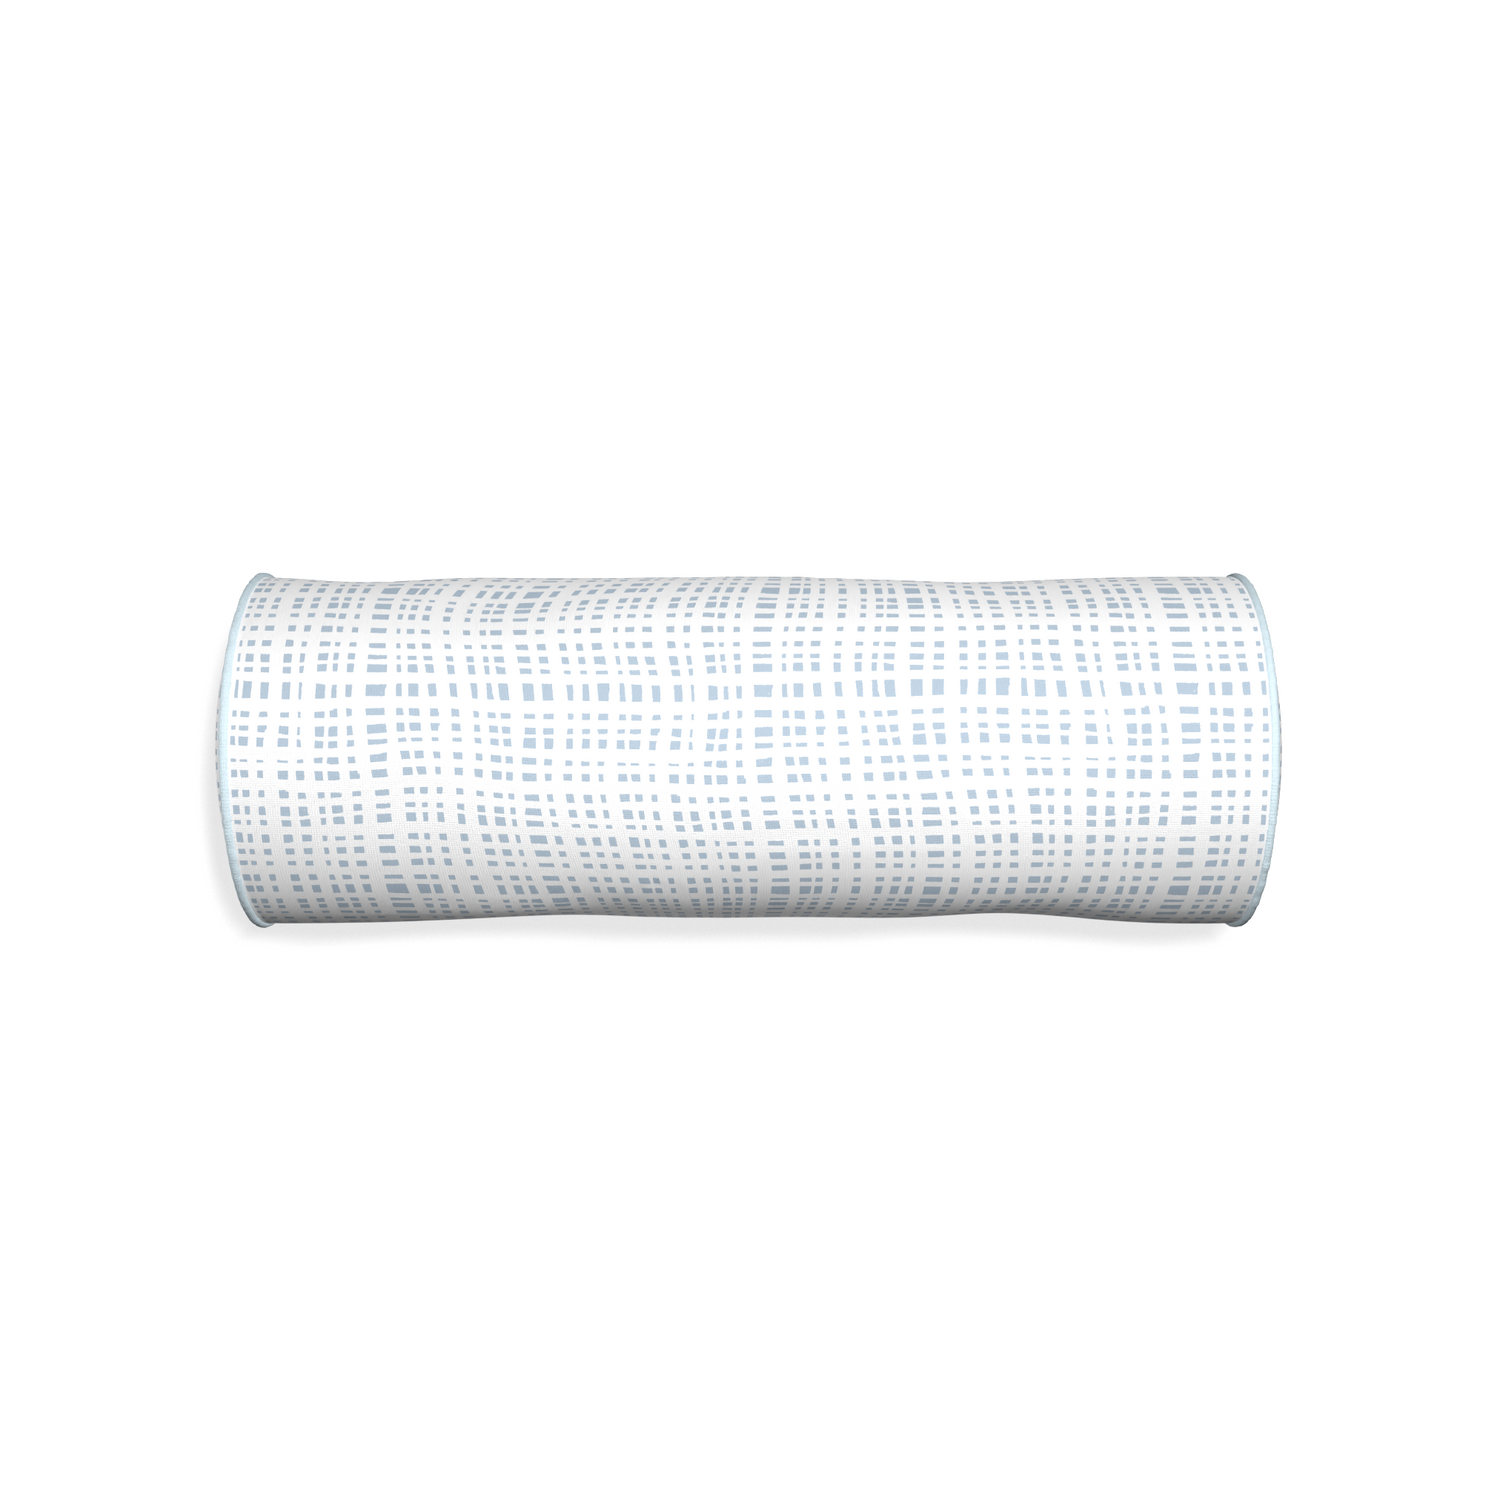 Bolster ginger custom plaid sky bluepillow with powder piping on white background